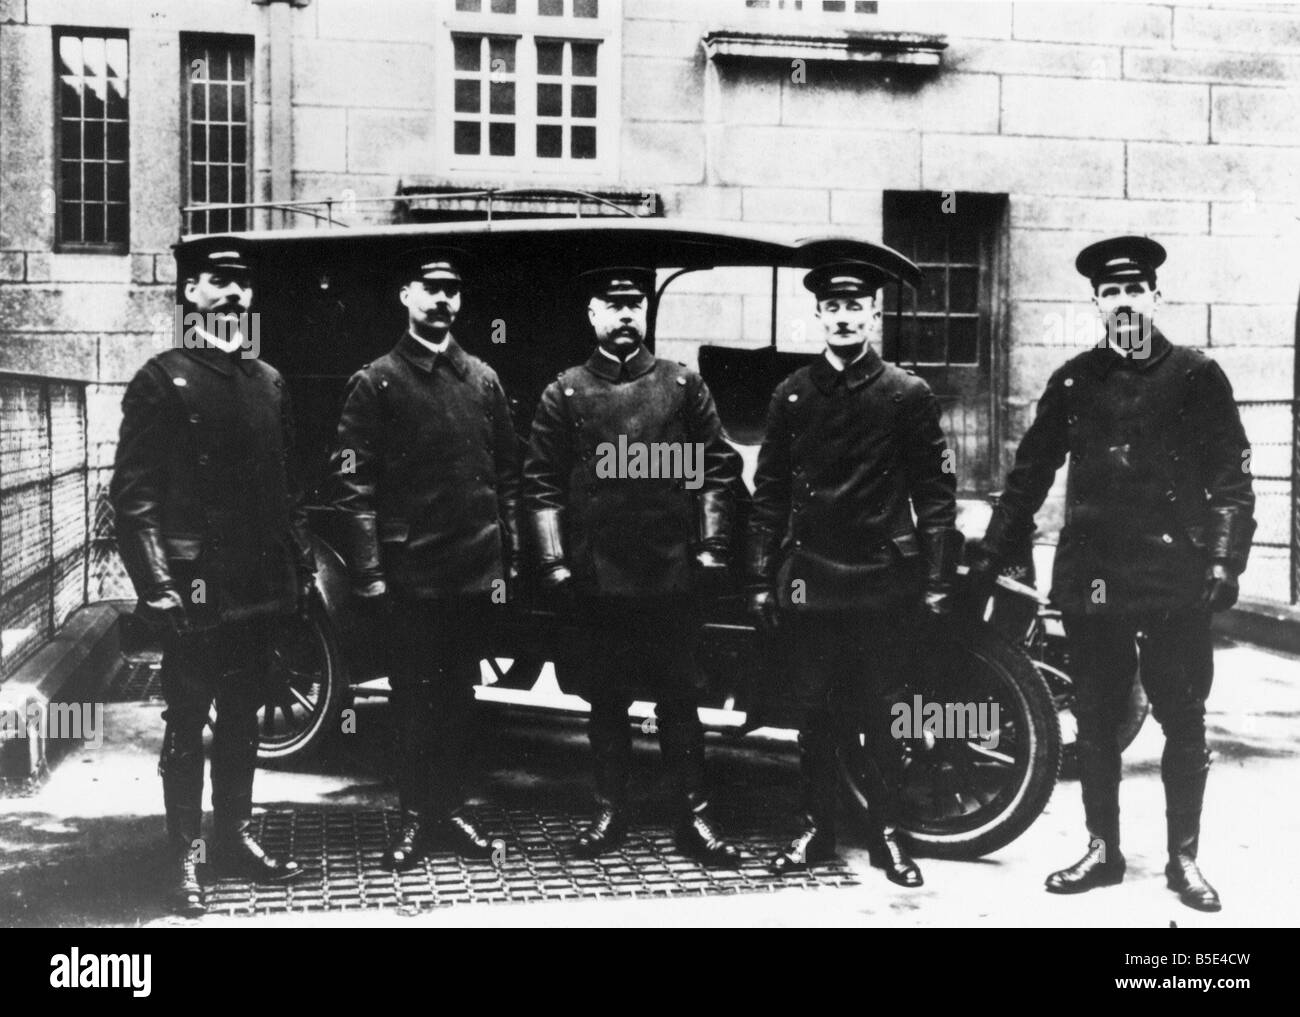 A group of mobile police officers with a police van 1910 1920 circa Stock Photo